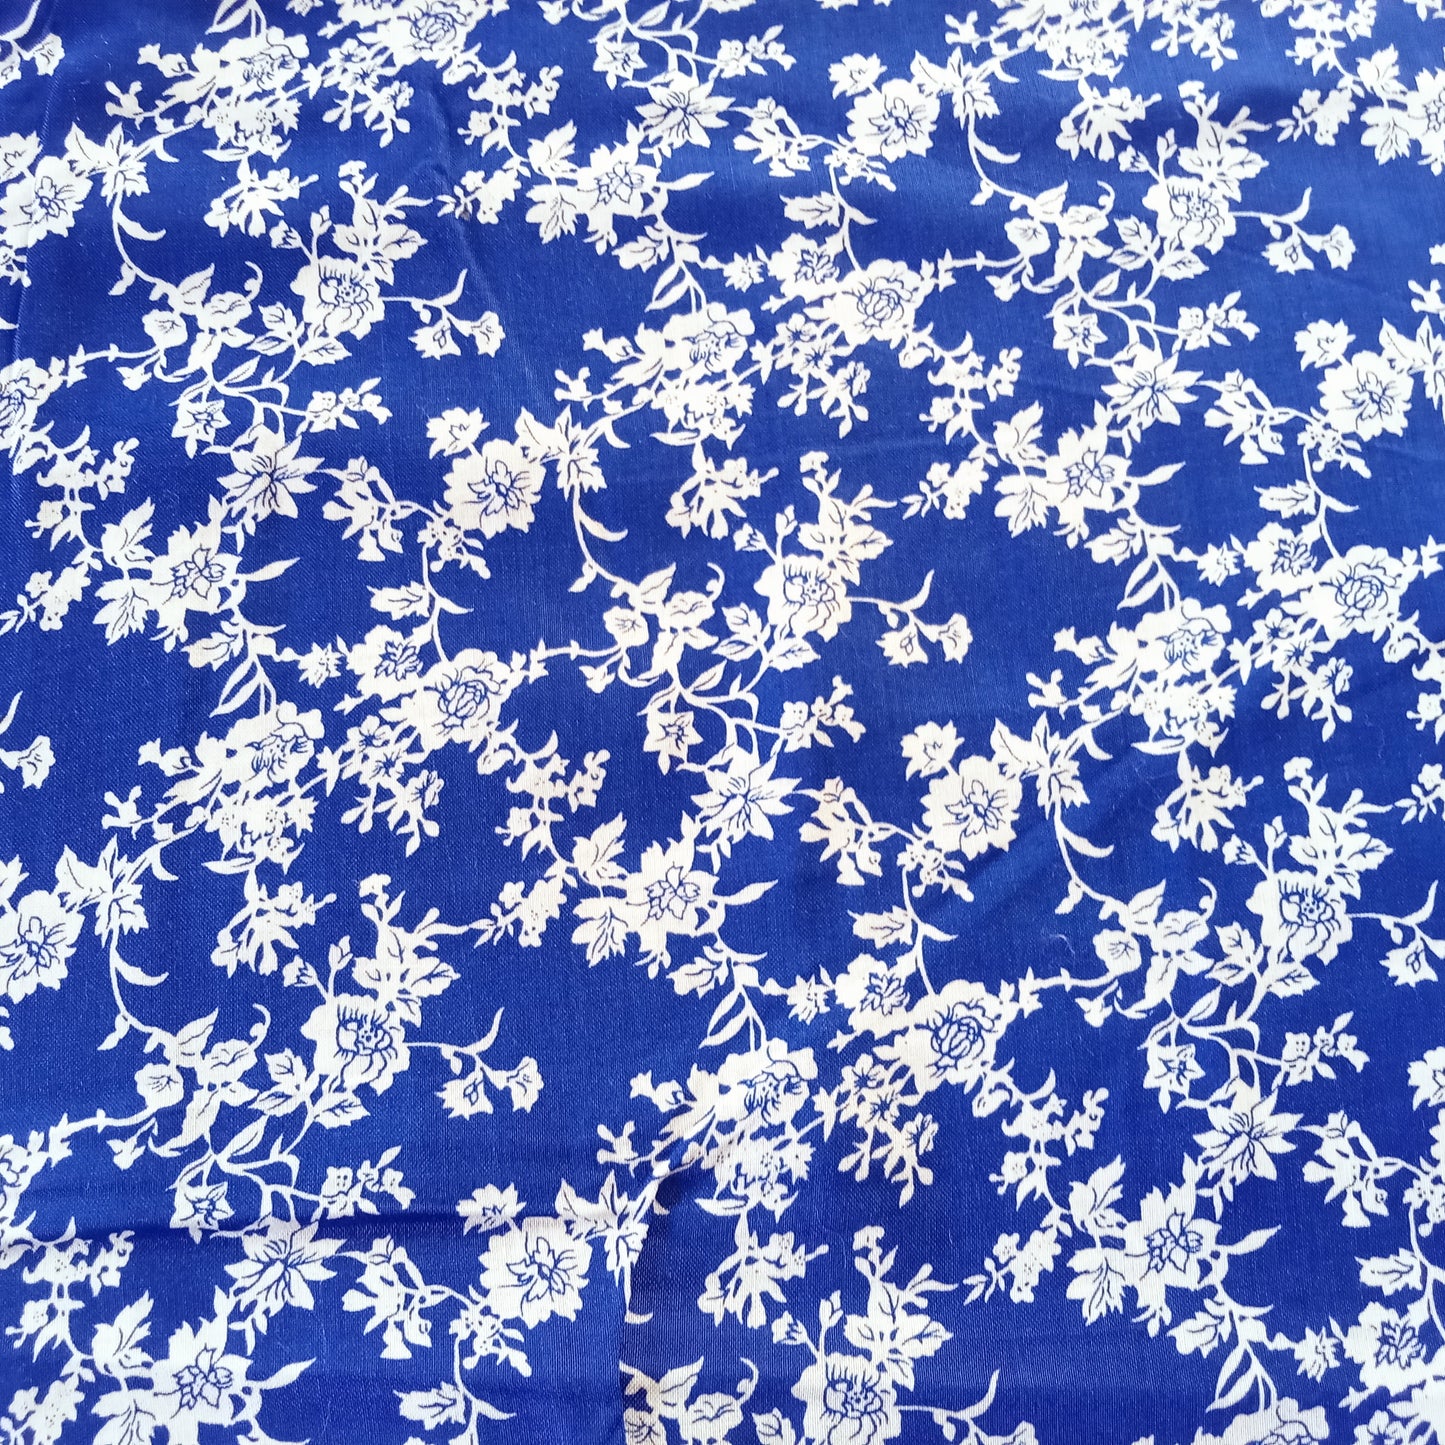 Floral printed woven fabric - sold by 1/2mtr